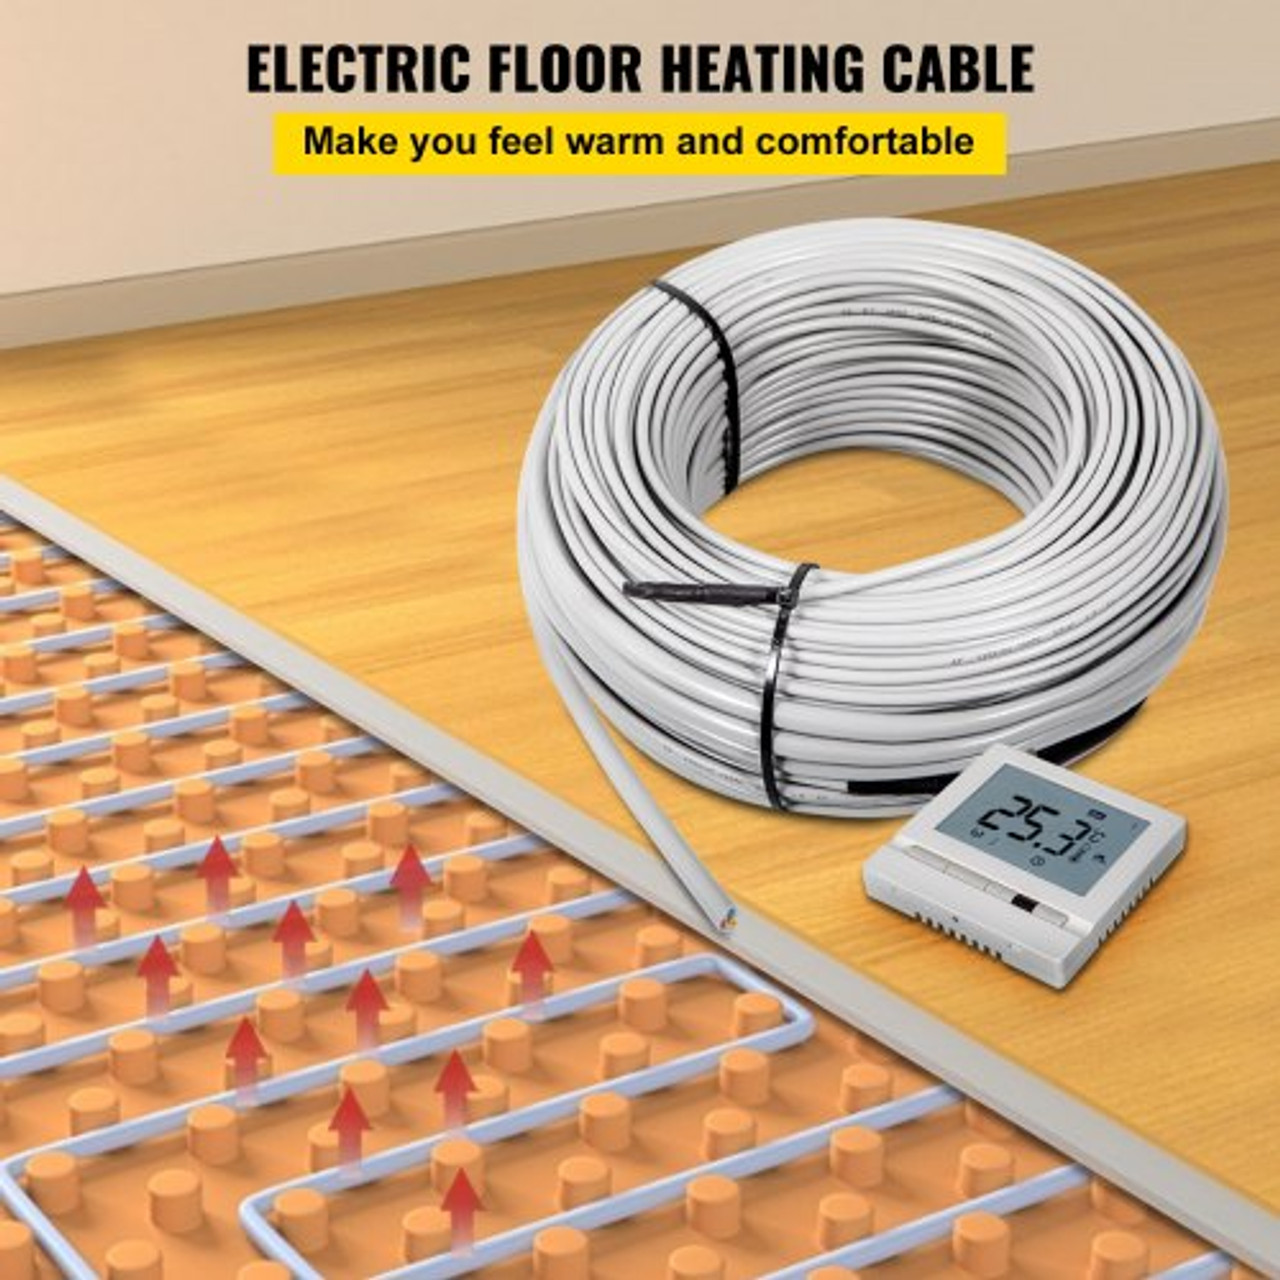 Ditra Floor Heating Cable,270W 120V Floor Tile Heat Cable,70.5 FT Long,21.3 sqft,with Convenient Temperature Control Panel,No Noise or Radiation